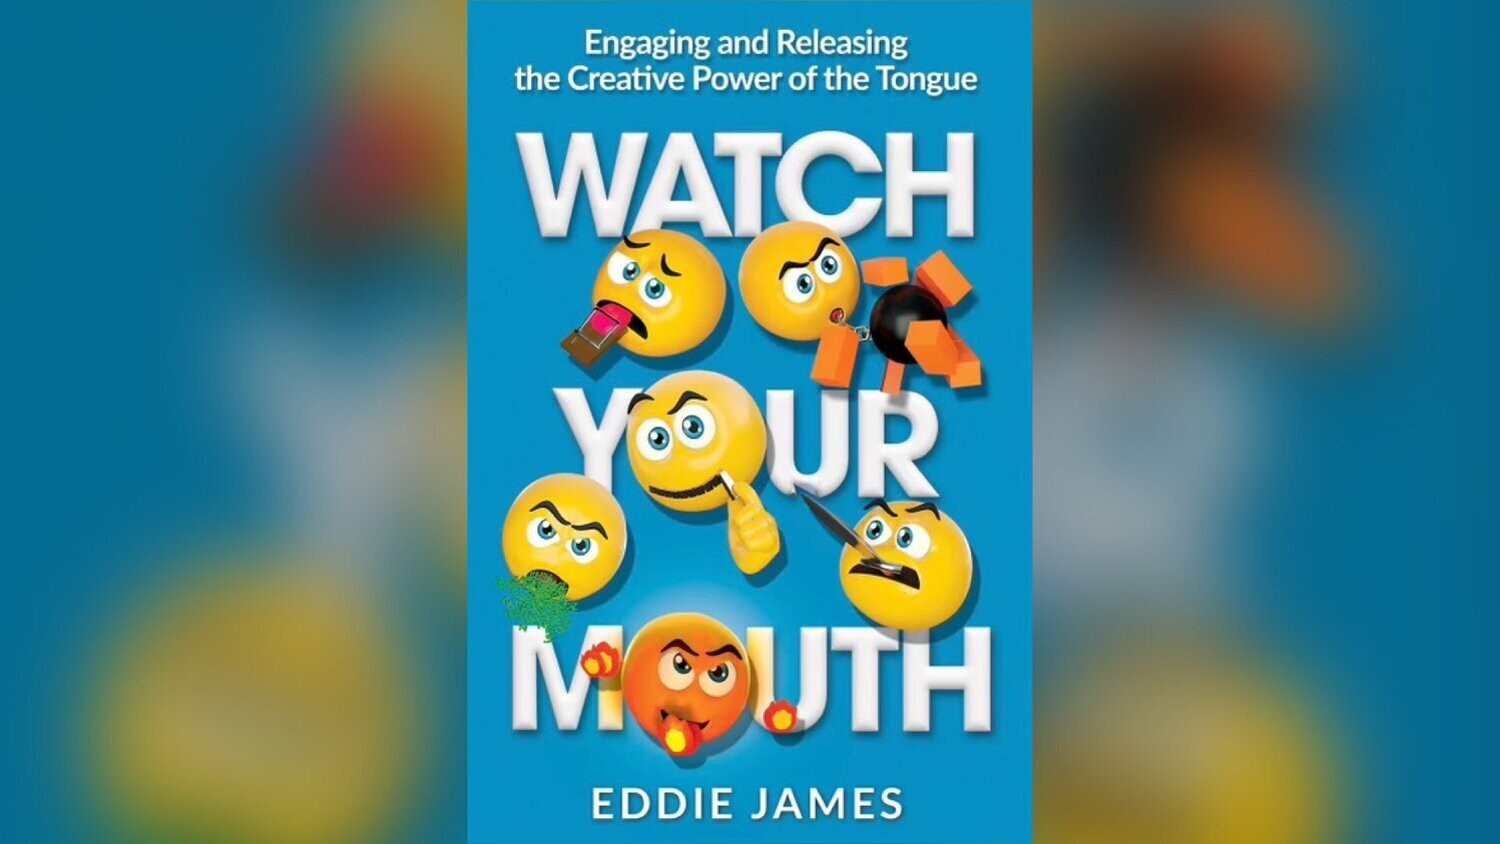 Watch Your Mouth